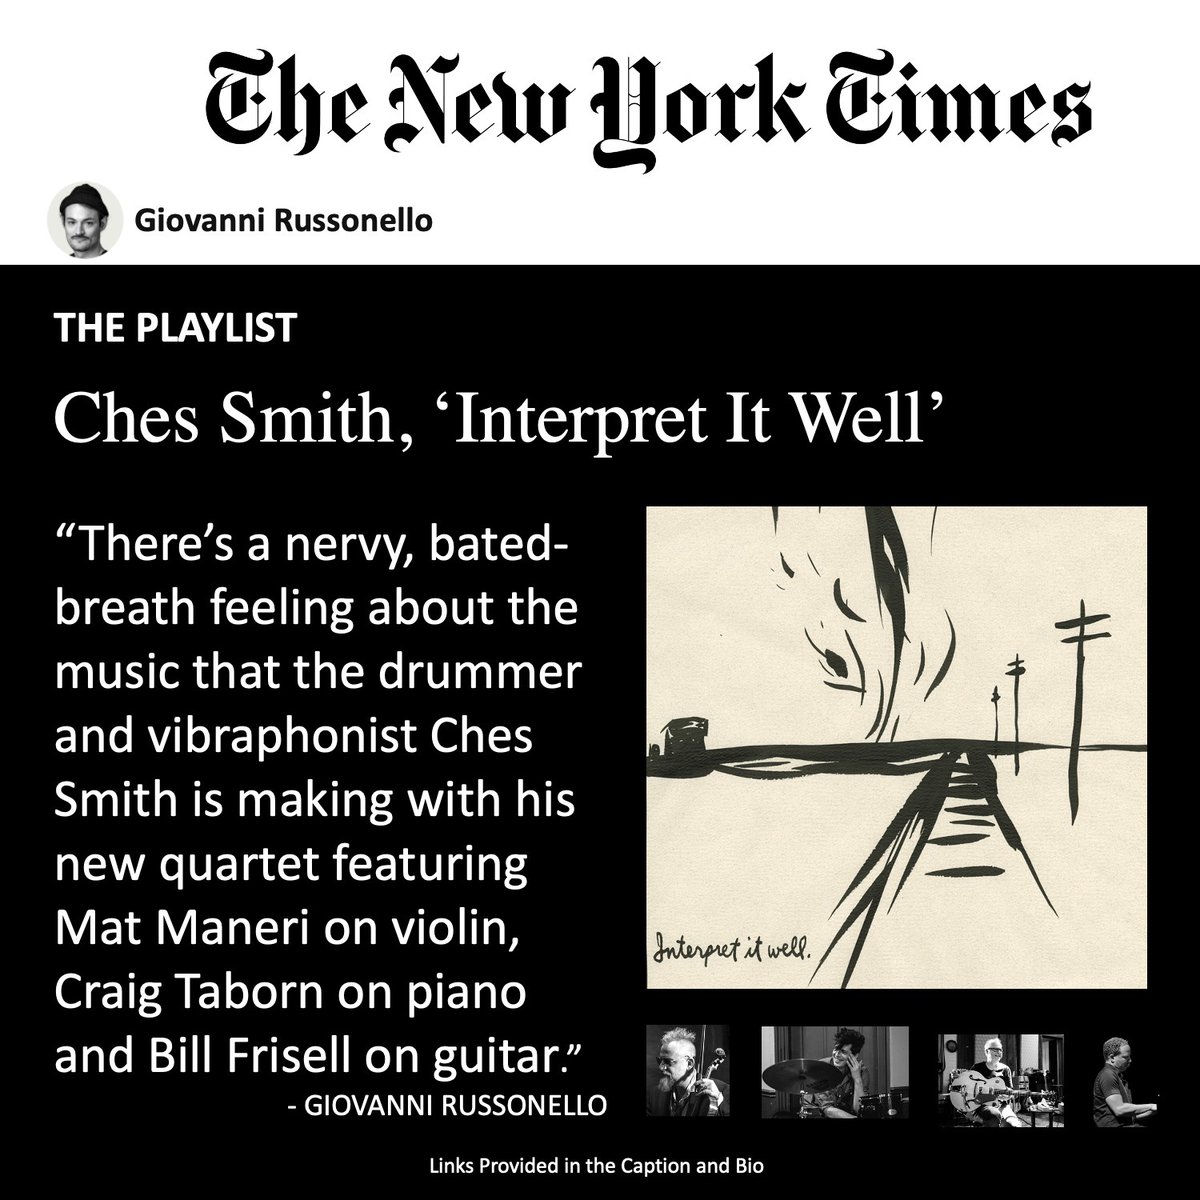 'There’s a nervy, bated-breath feeling about the music that the drummer and vibraphonist Ches Smith is making...' GIOVANNI RUSSONELLO @nytimesmusic nytimes.com/2022/05/13/art…